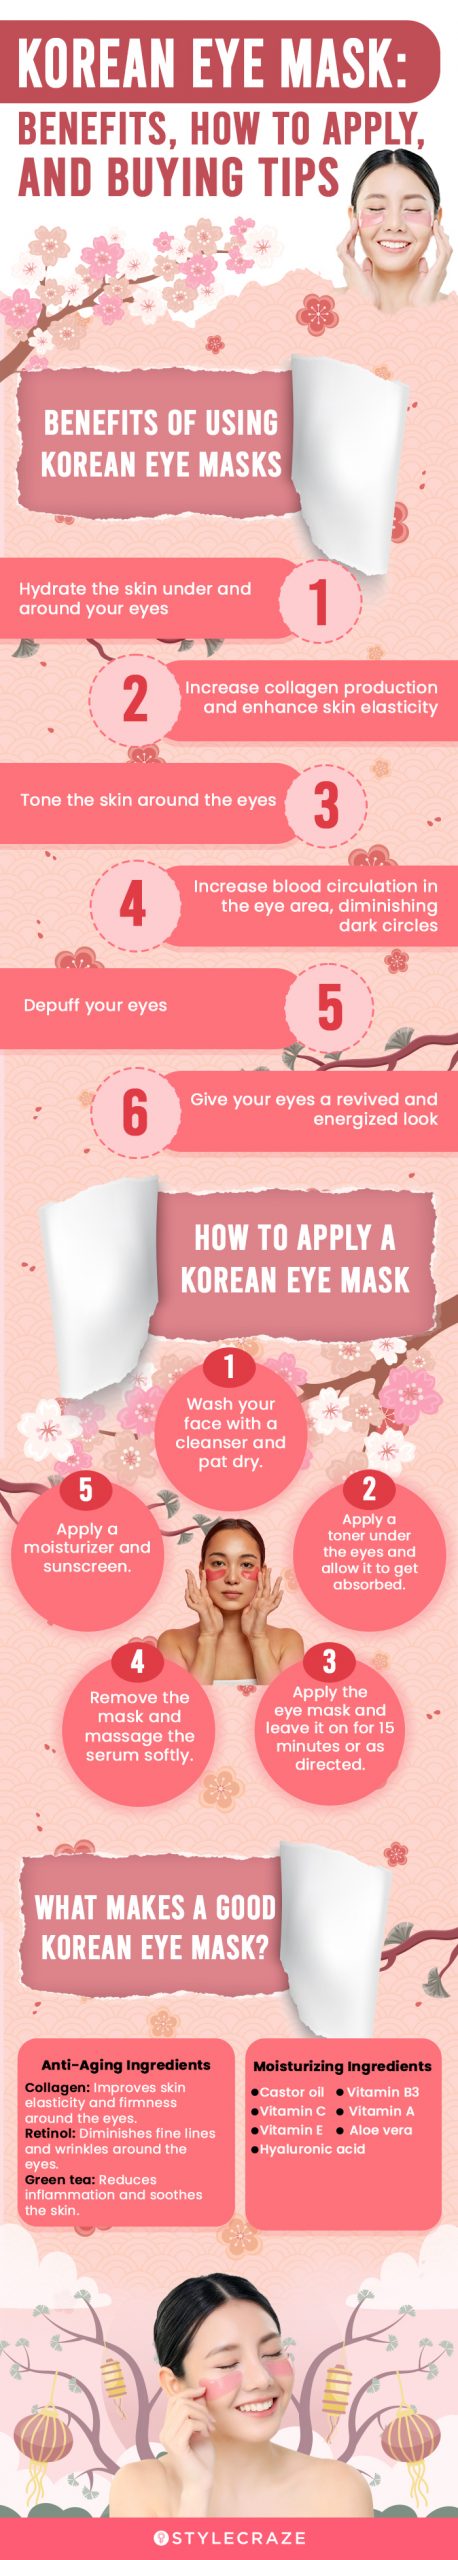 Korean Eye Mask: Benefits, How To Apply, And Buying Tips (infographic)